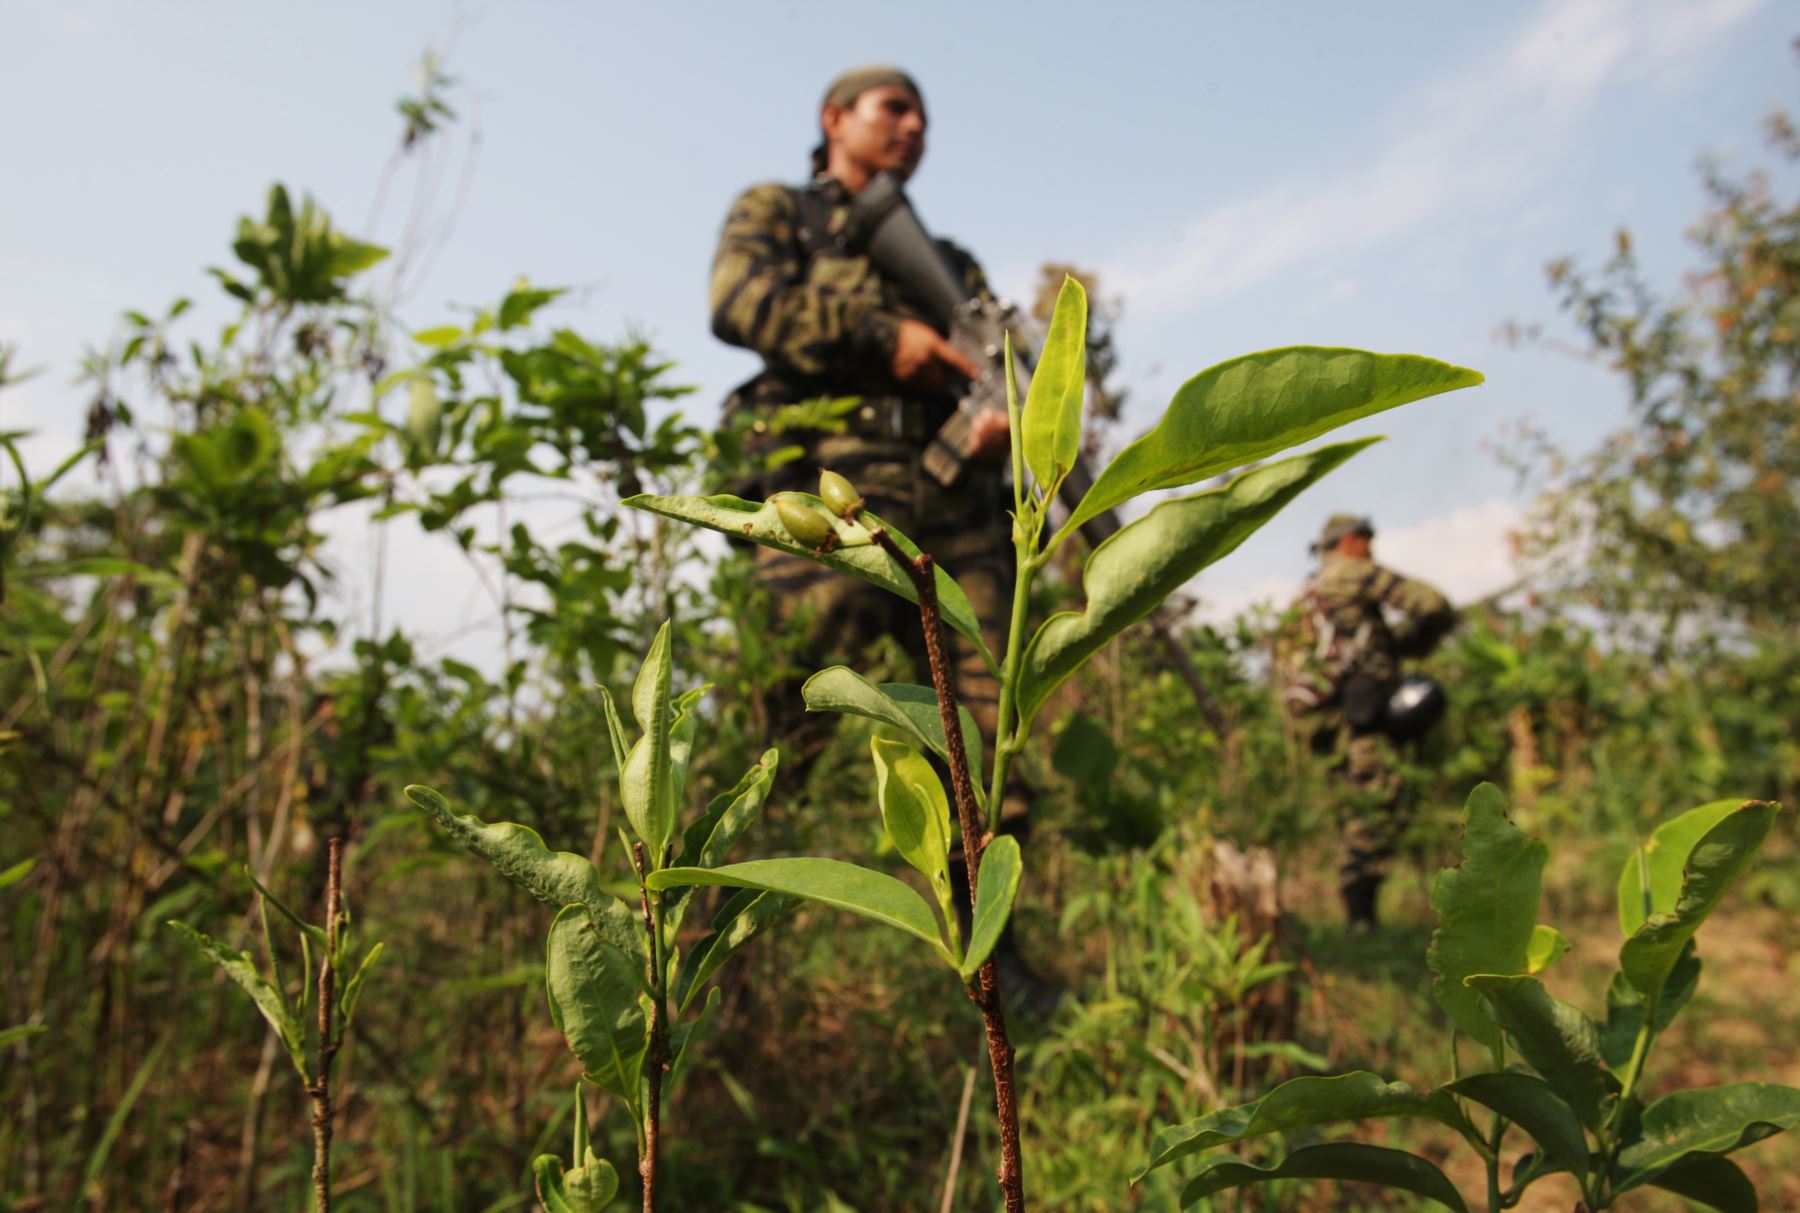 Peru: 3,456 hectares of illegal coca crops eradicated in Huanuco and Ucayali regions